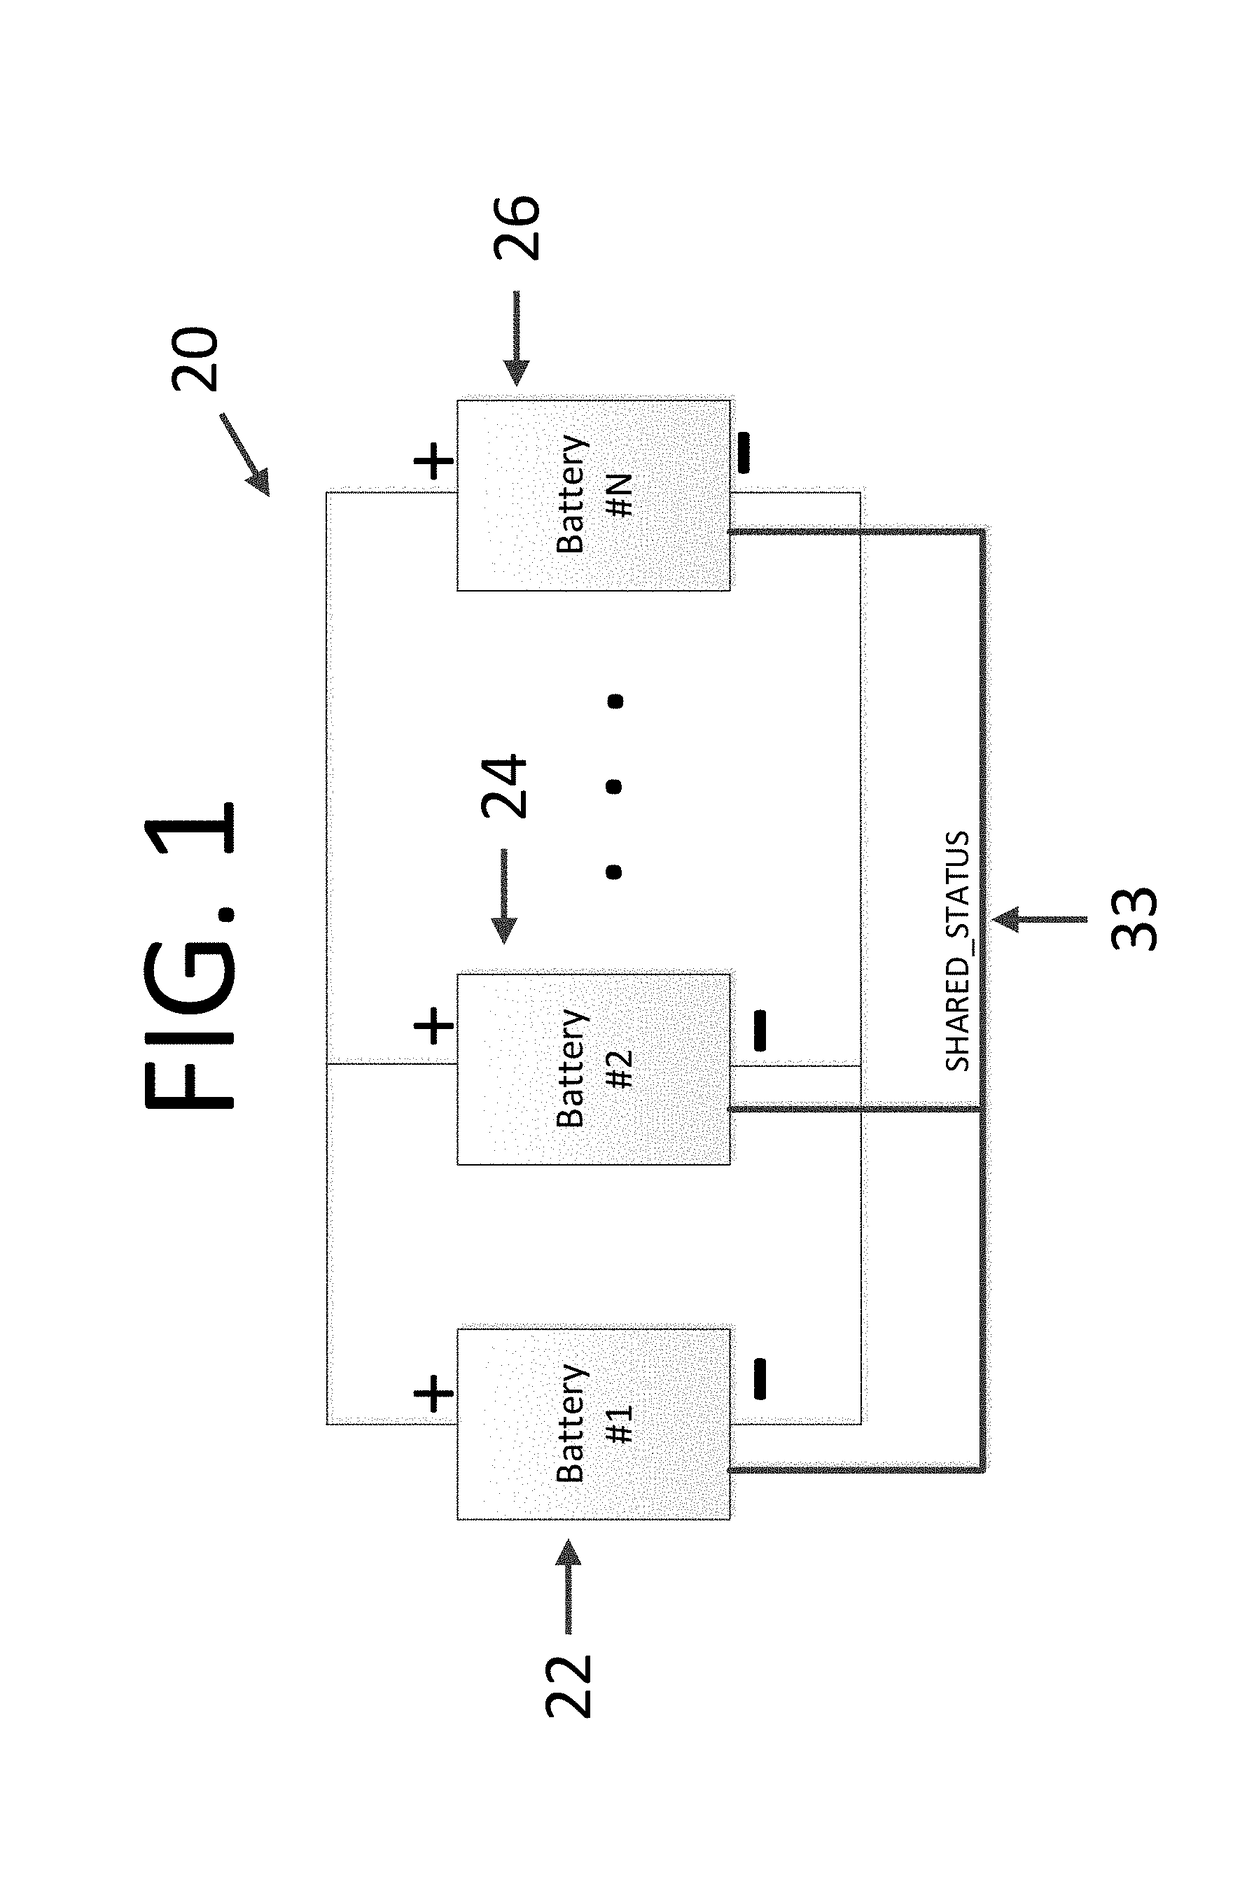 Coupling system and apparatus for parallel interconnection of independent battery modules